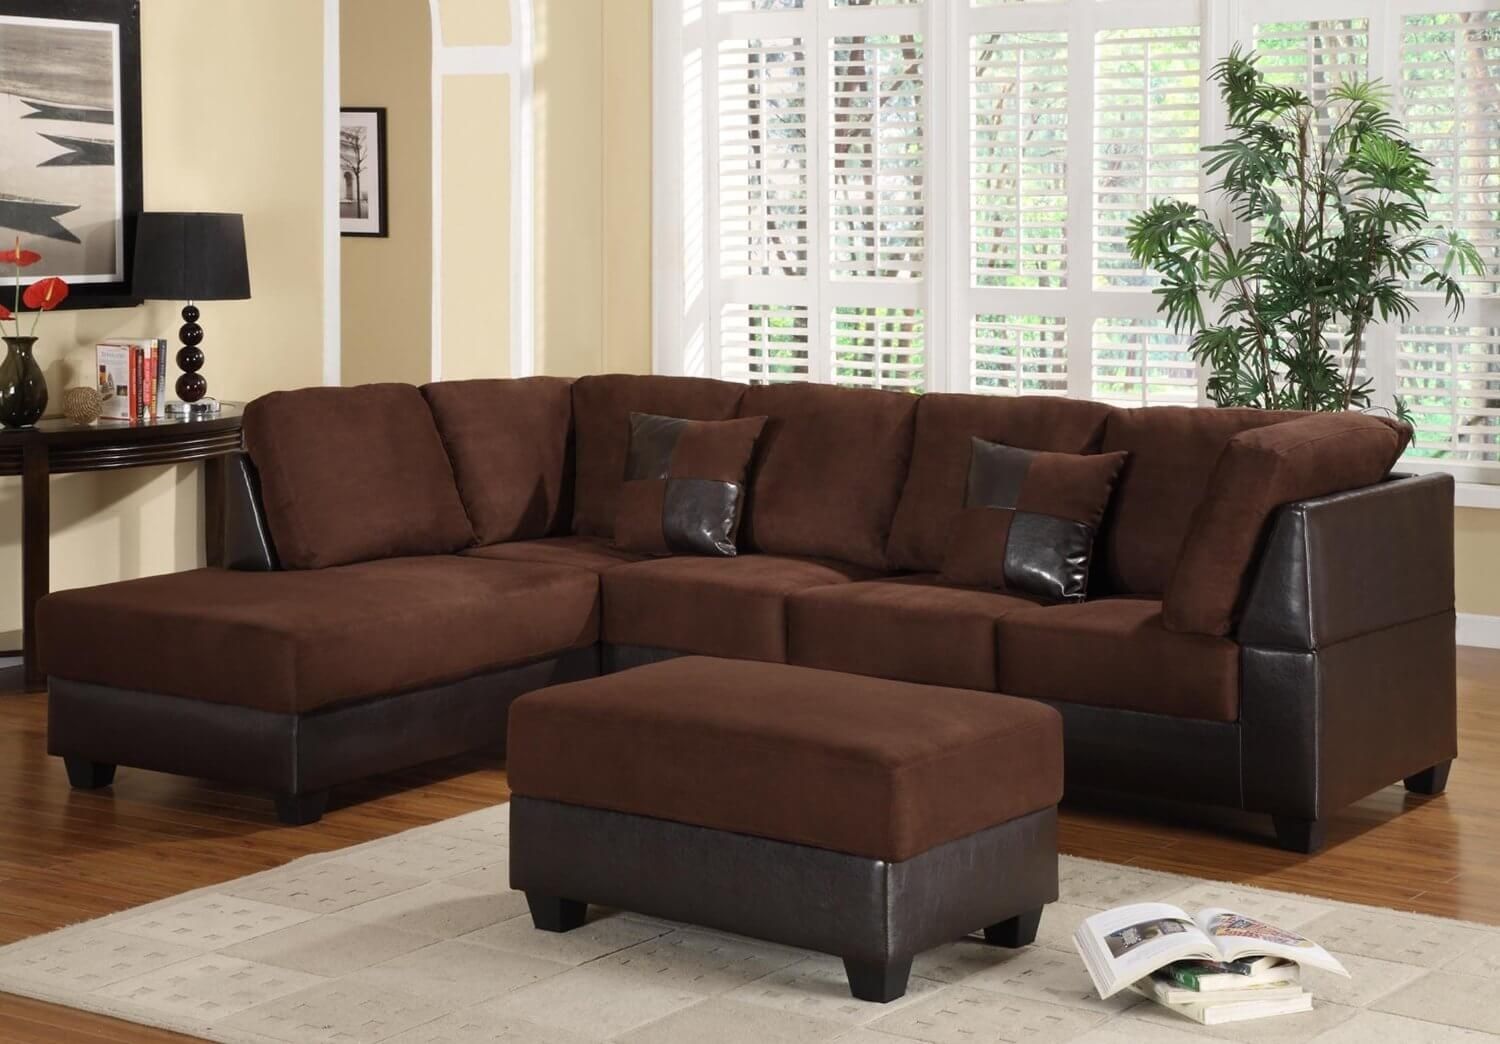 40 Cheap Sectional Sofas Under $500 For 2018 With Sectional Sofas Under 500 (Photo 1 of 10)